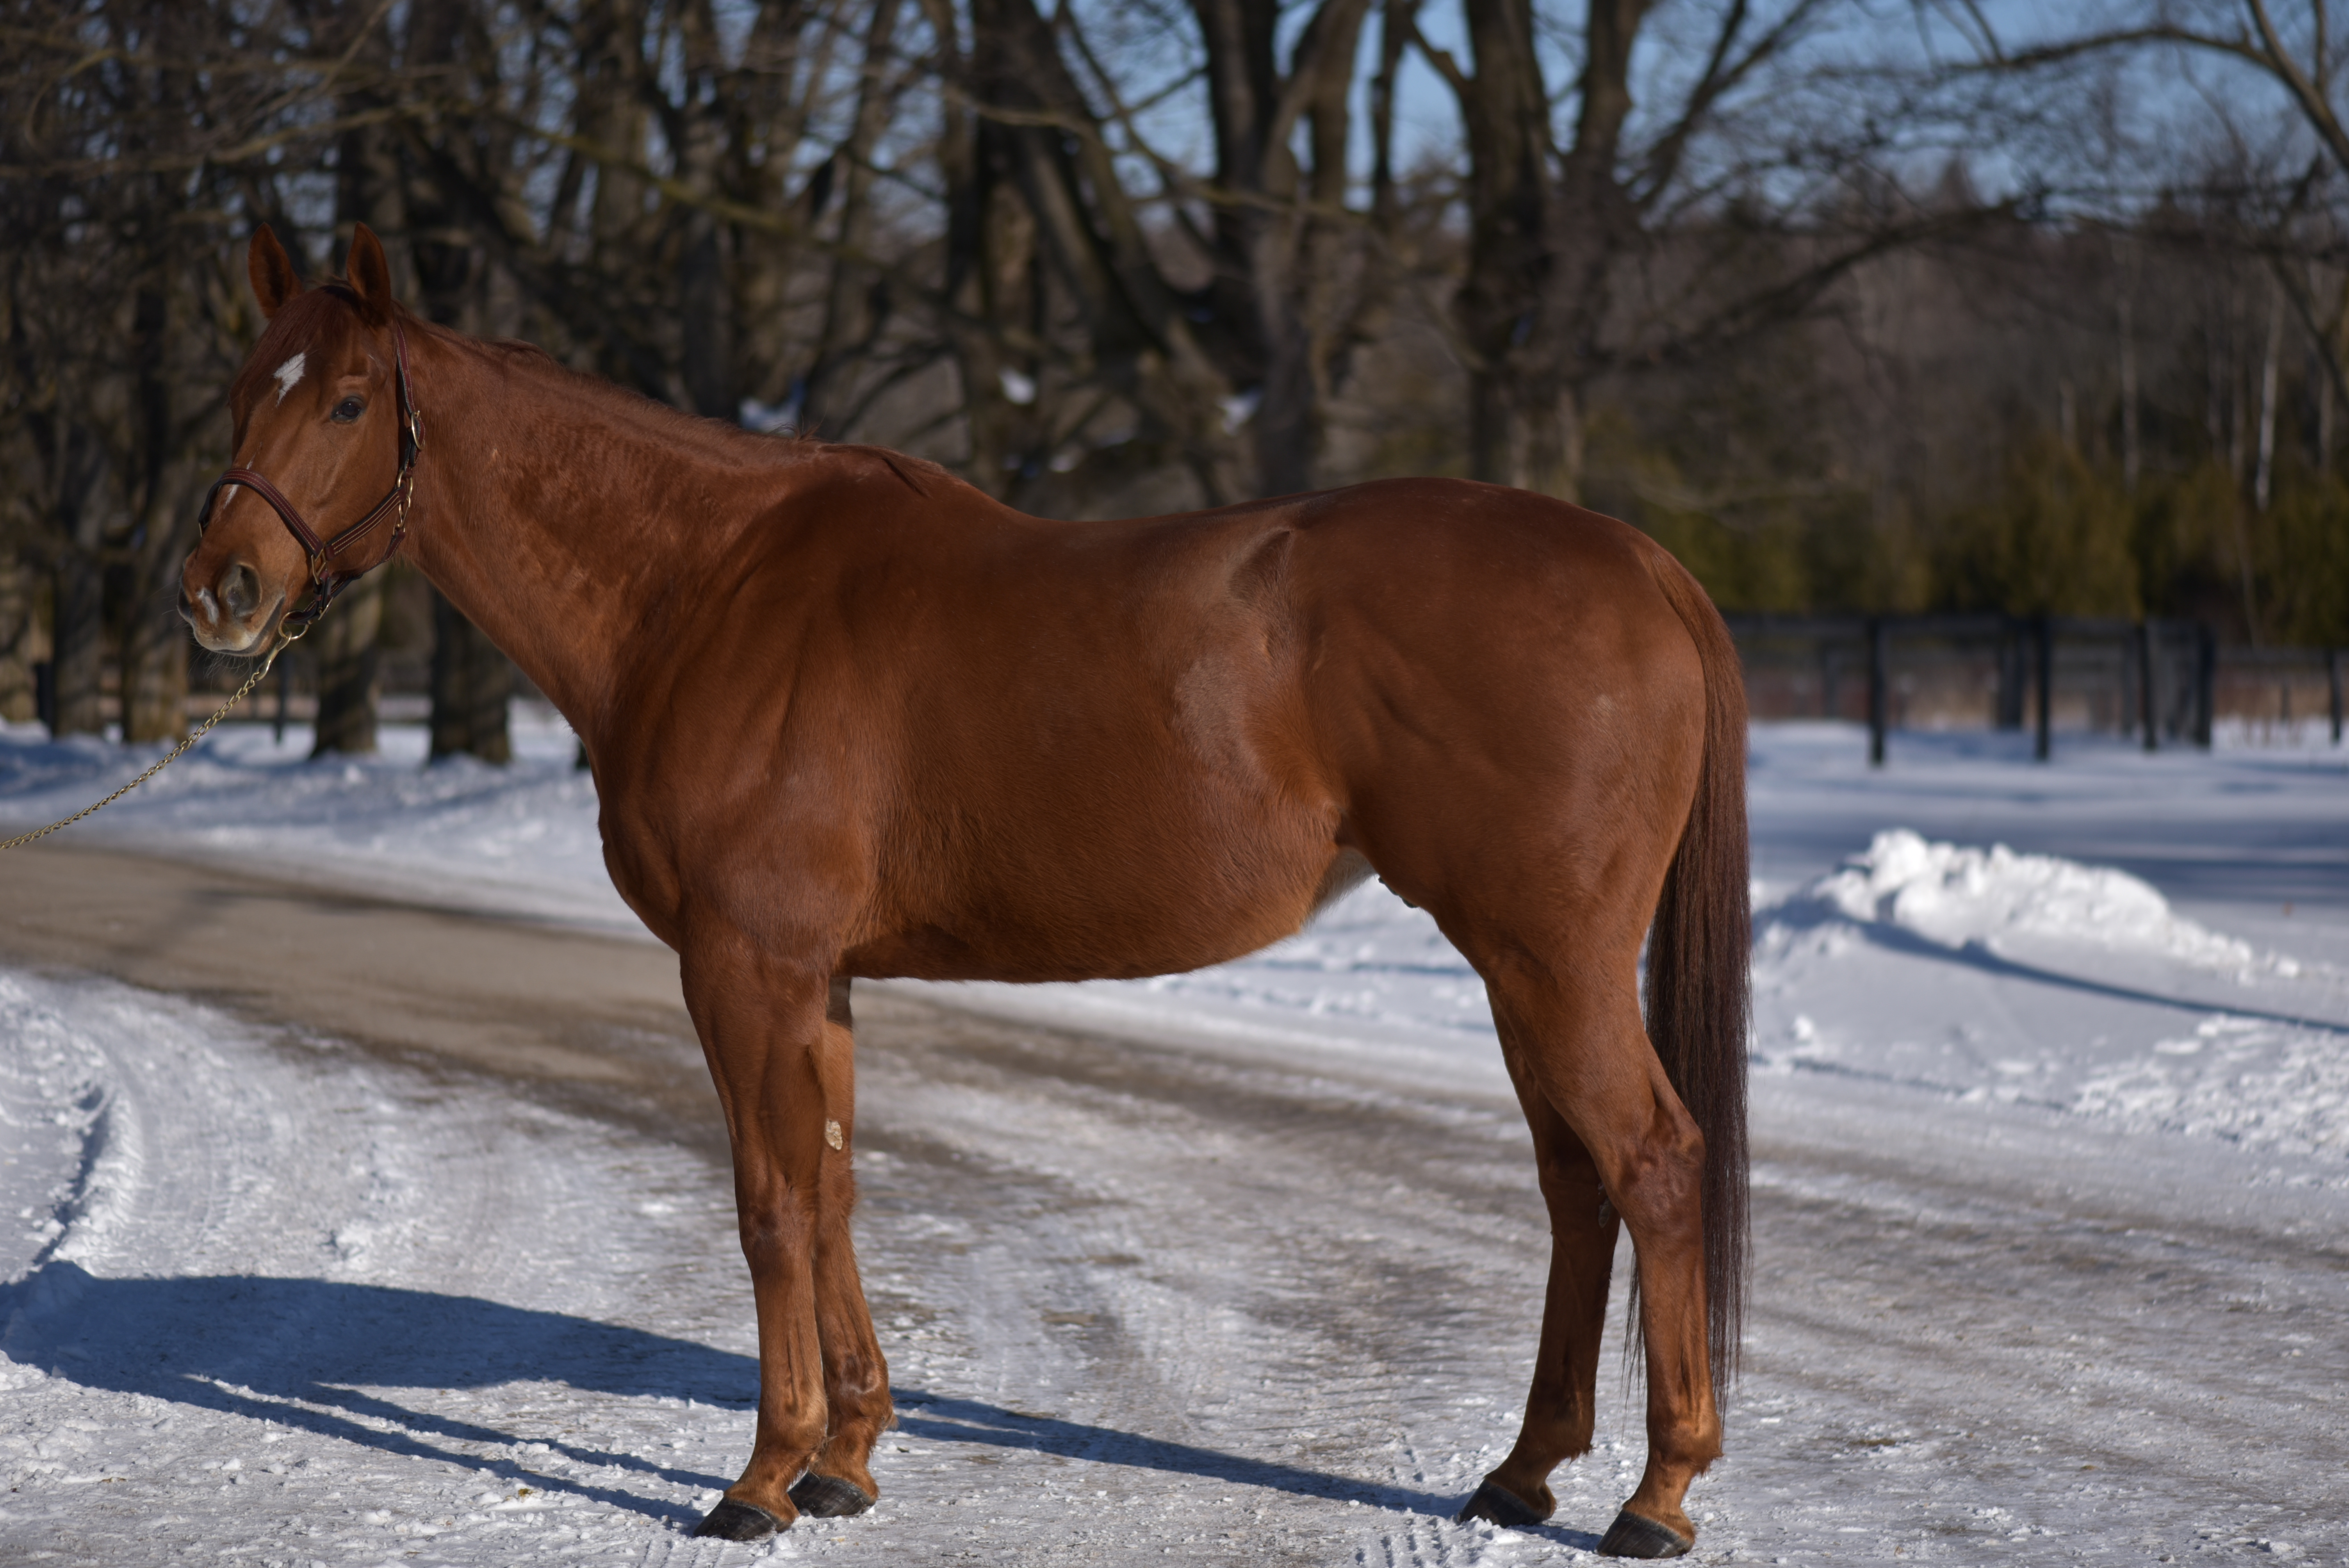 Chestnut horse standing on a driveway with winter scenery behind